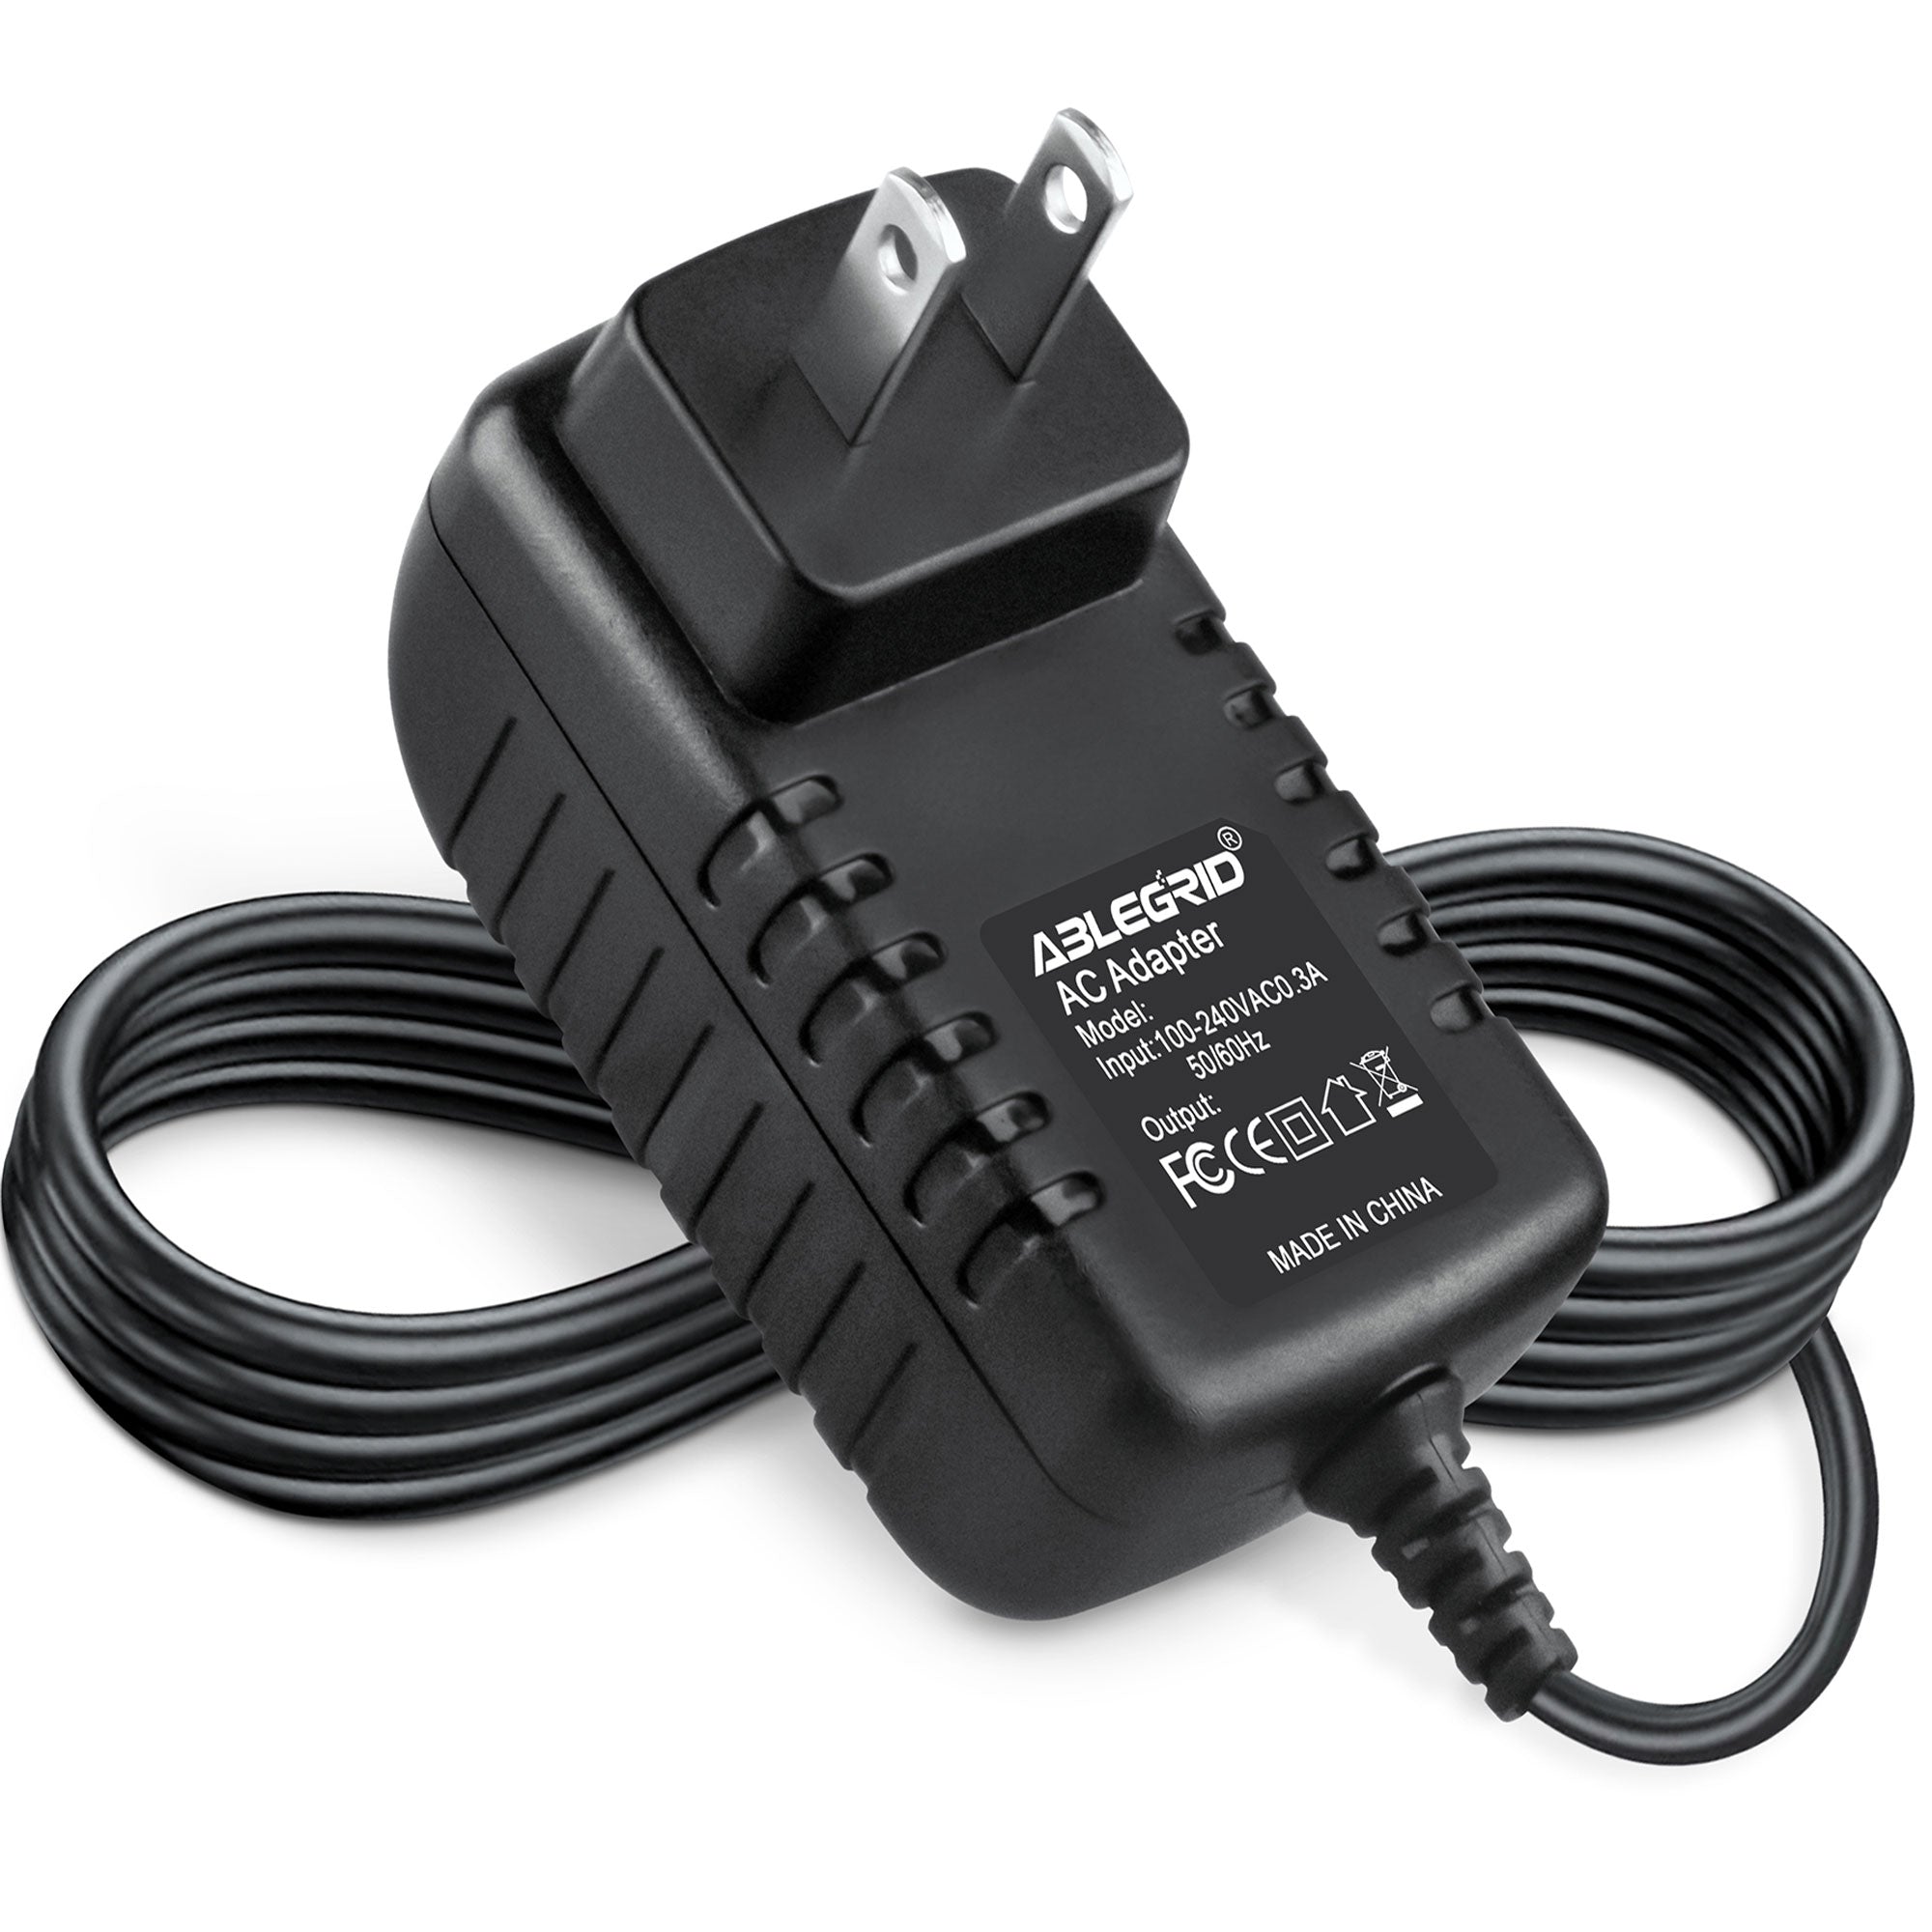 AbleGrid AC / DC Adapter for SIL Sunstrong SSA-5AP-09 US 060045 SSA-5AP-09US060045 Clarity Switching Power Supply Cord Cable PS Wall Home Charger Input: 100 - 240 VAC Worldwide Use Mains PSU